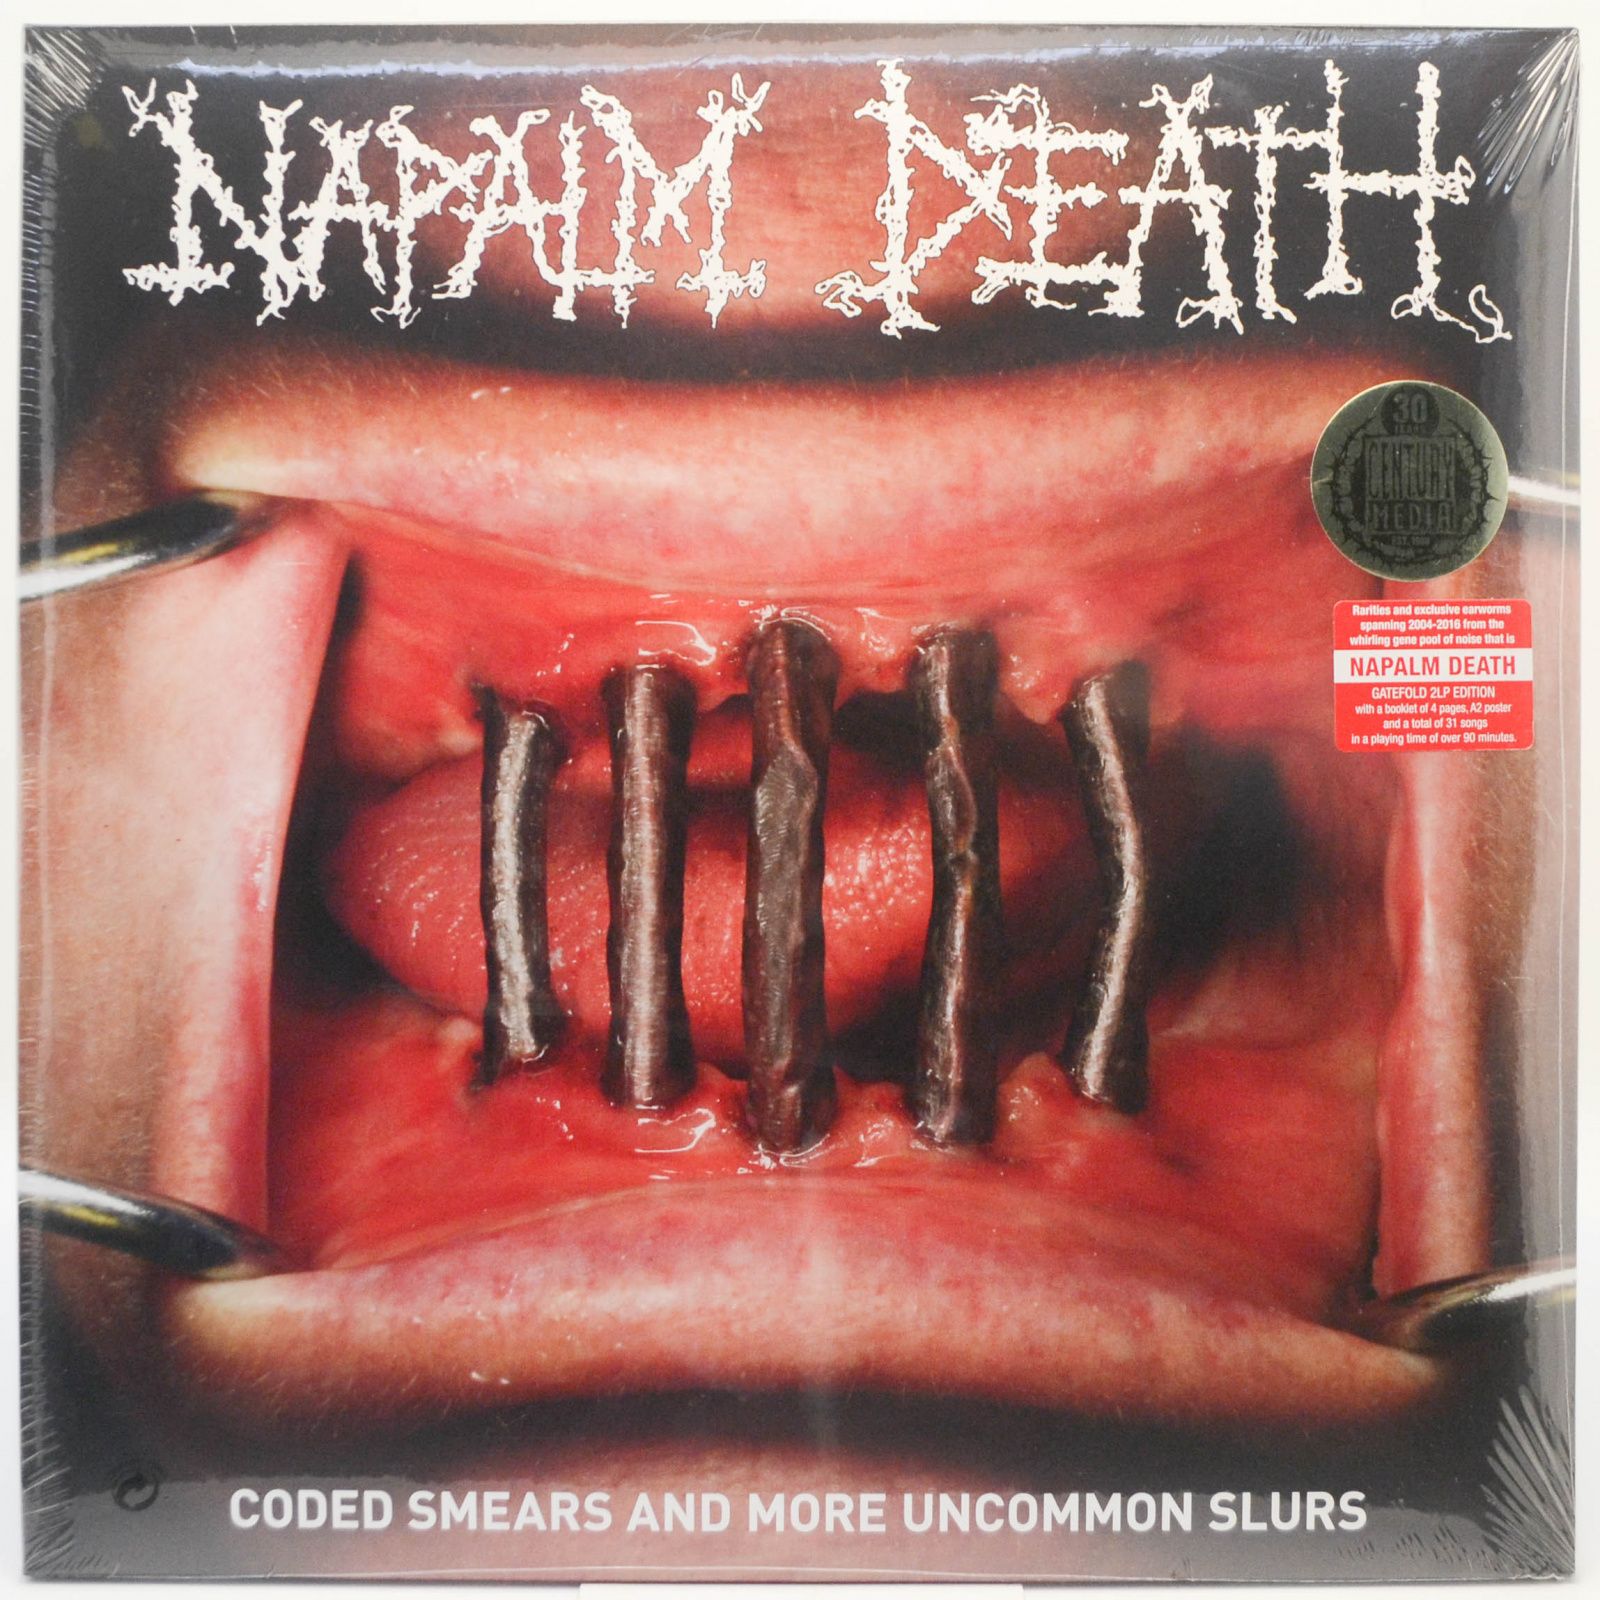 Napalm Death — Coded Smears And More Uncommon Slurs, 2018